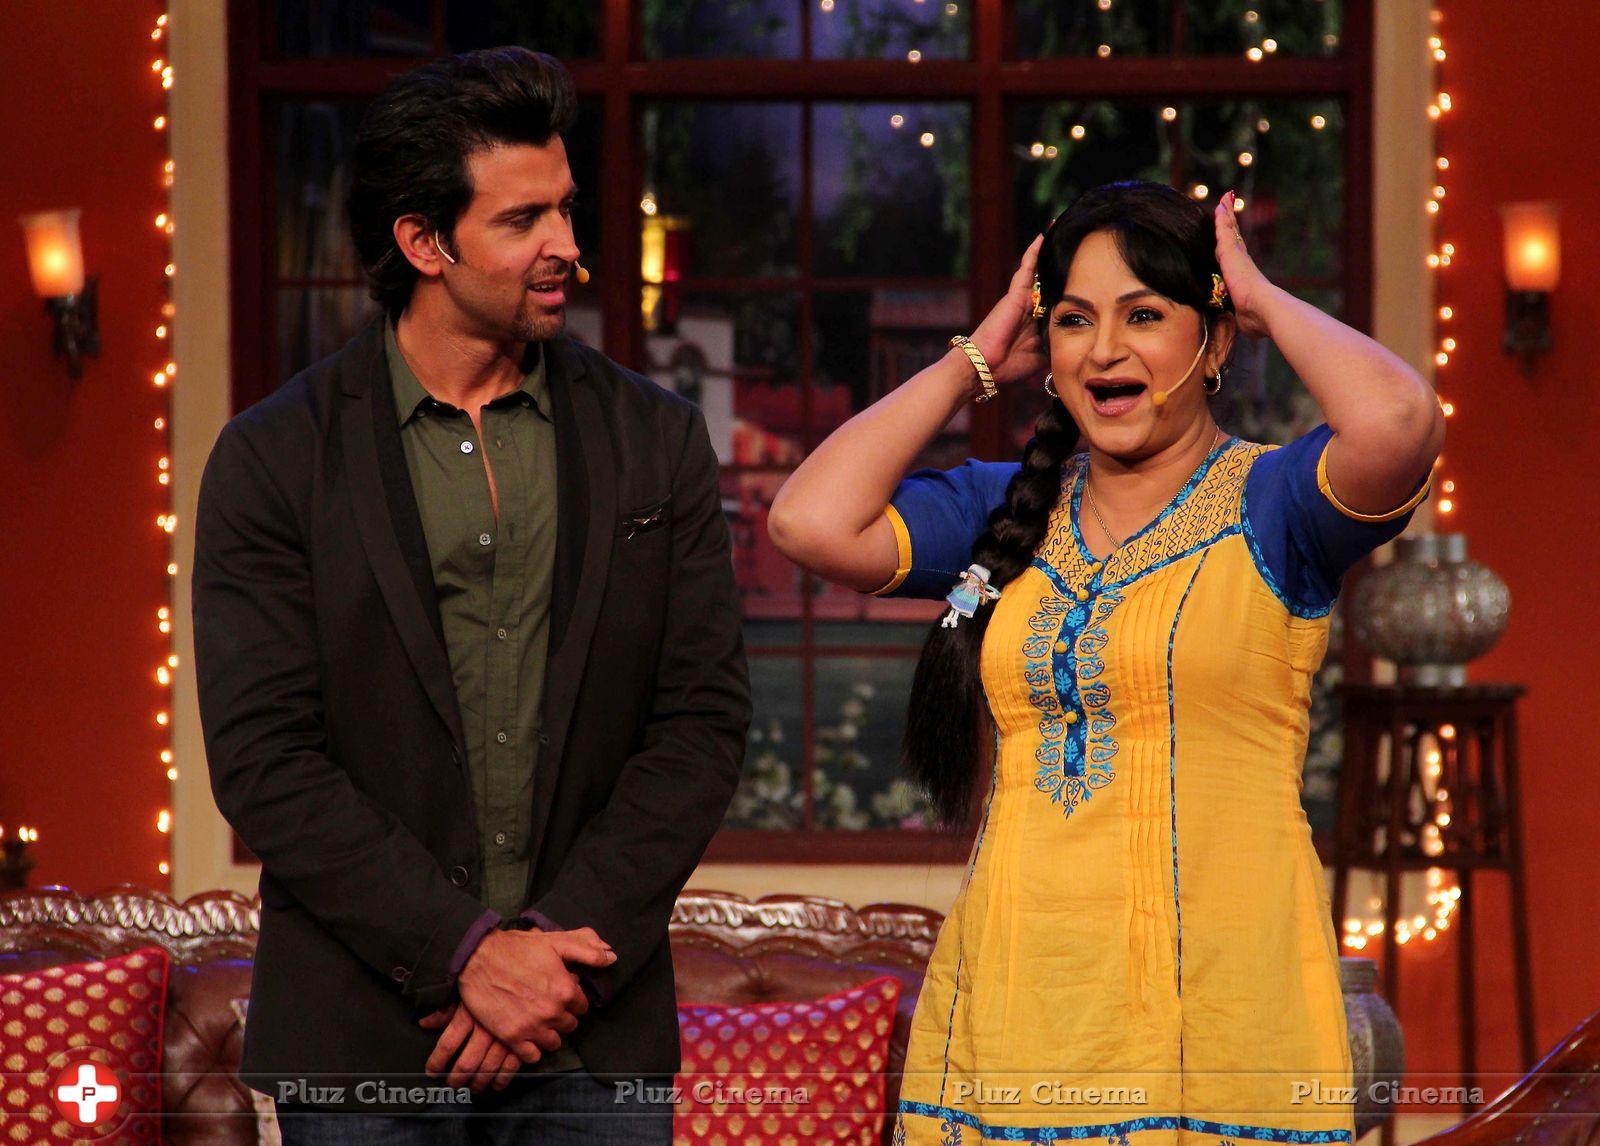 Hrithik Roshan - Hrithik Roshan Promotes Krrish 3 On the Sets Of Comedy Nights With Kapil Photos | Picture 611863